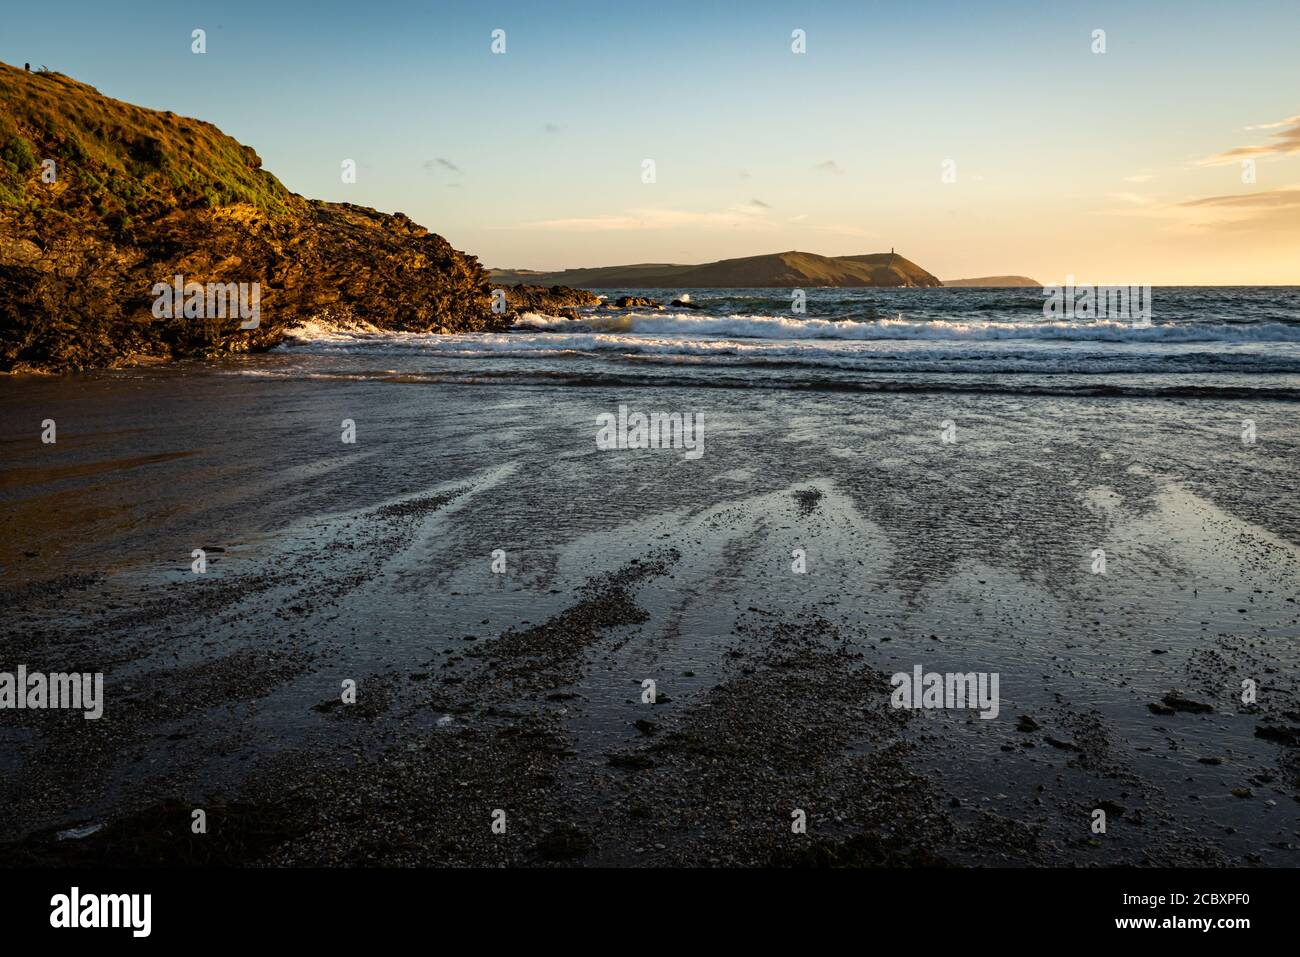 Early evening view of Polzeath beach with the rocks reflecting the setting sun and patterns from the retreating tide. Stock Photo